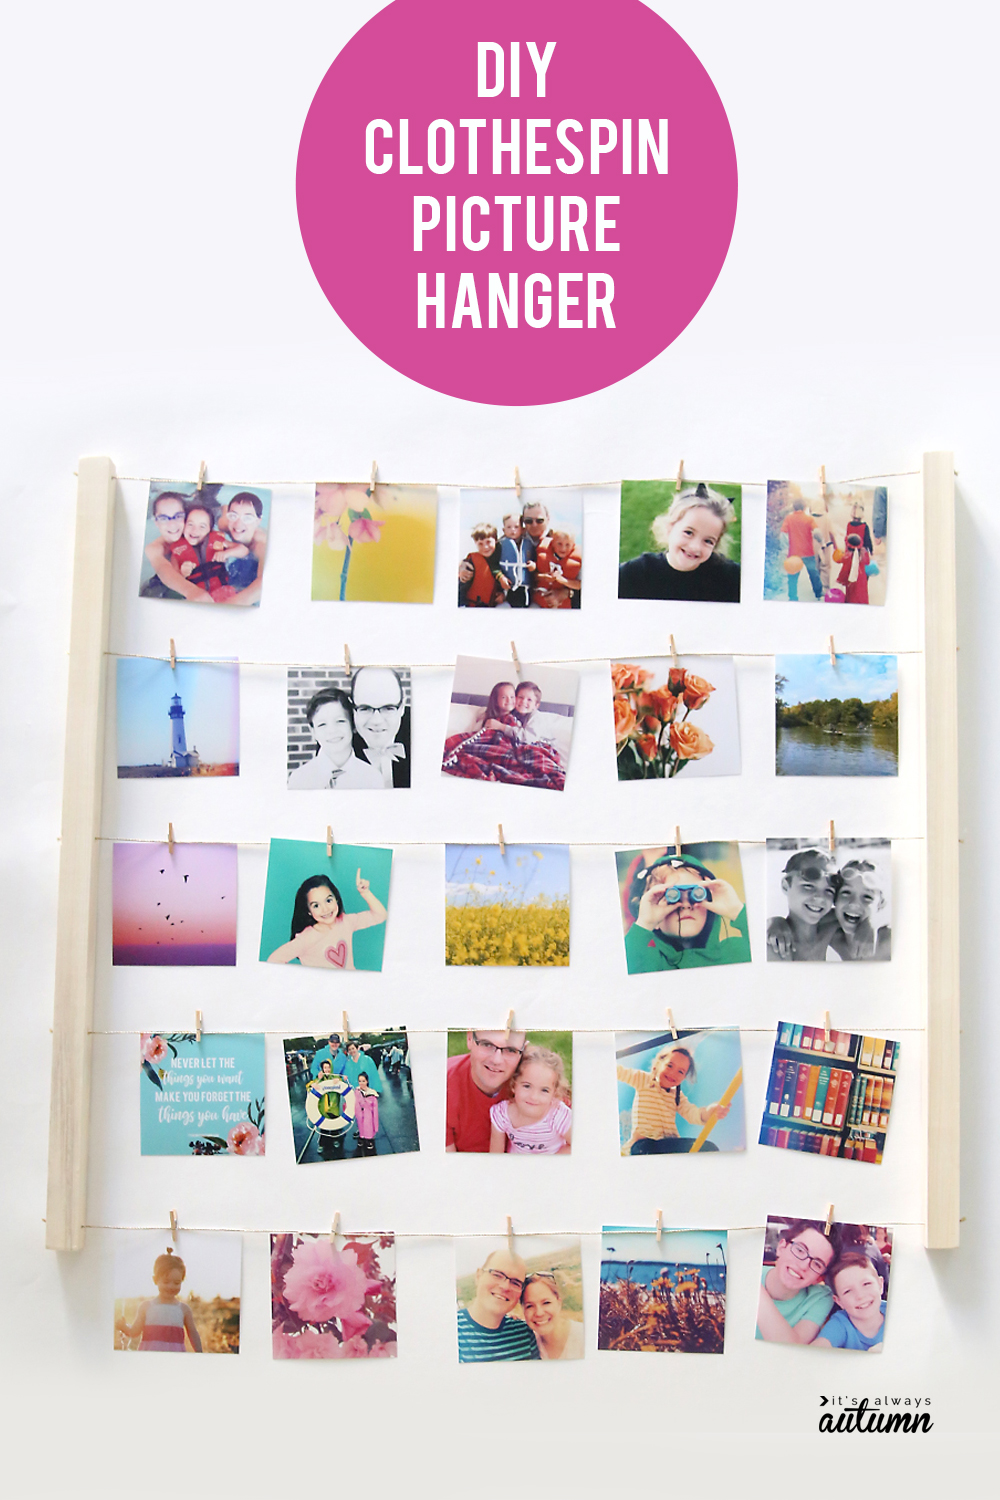 Hang pictures with fishing line and clothes pins!